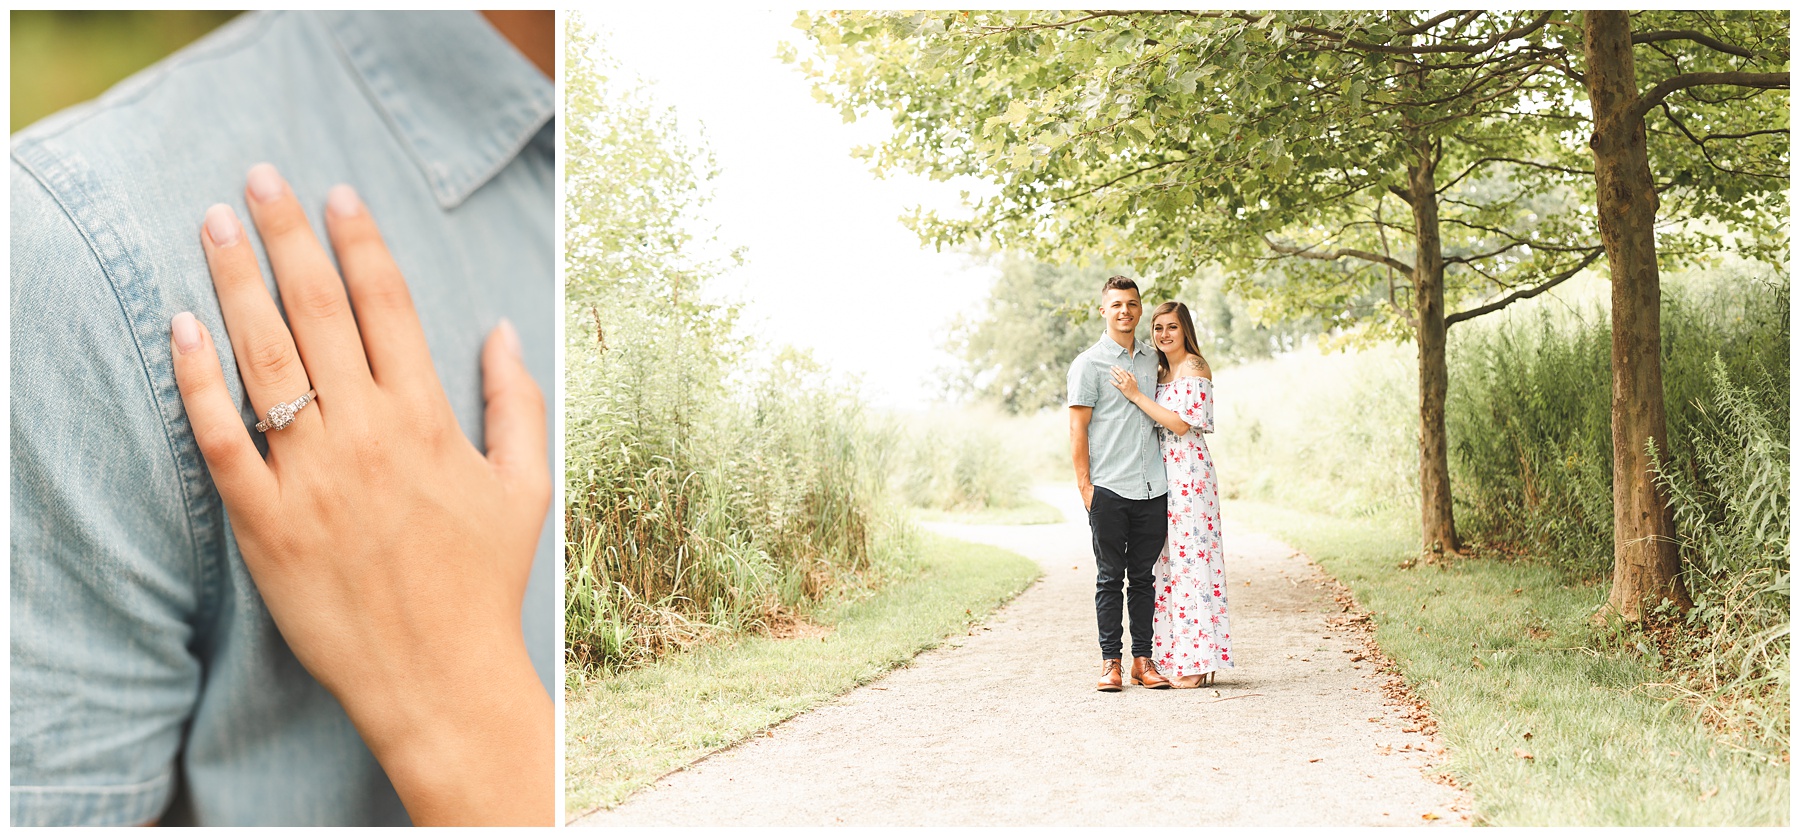 close up of engagement ring during Courtney & Tyler's engagement session at Long Dock Park in Beacon NY